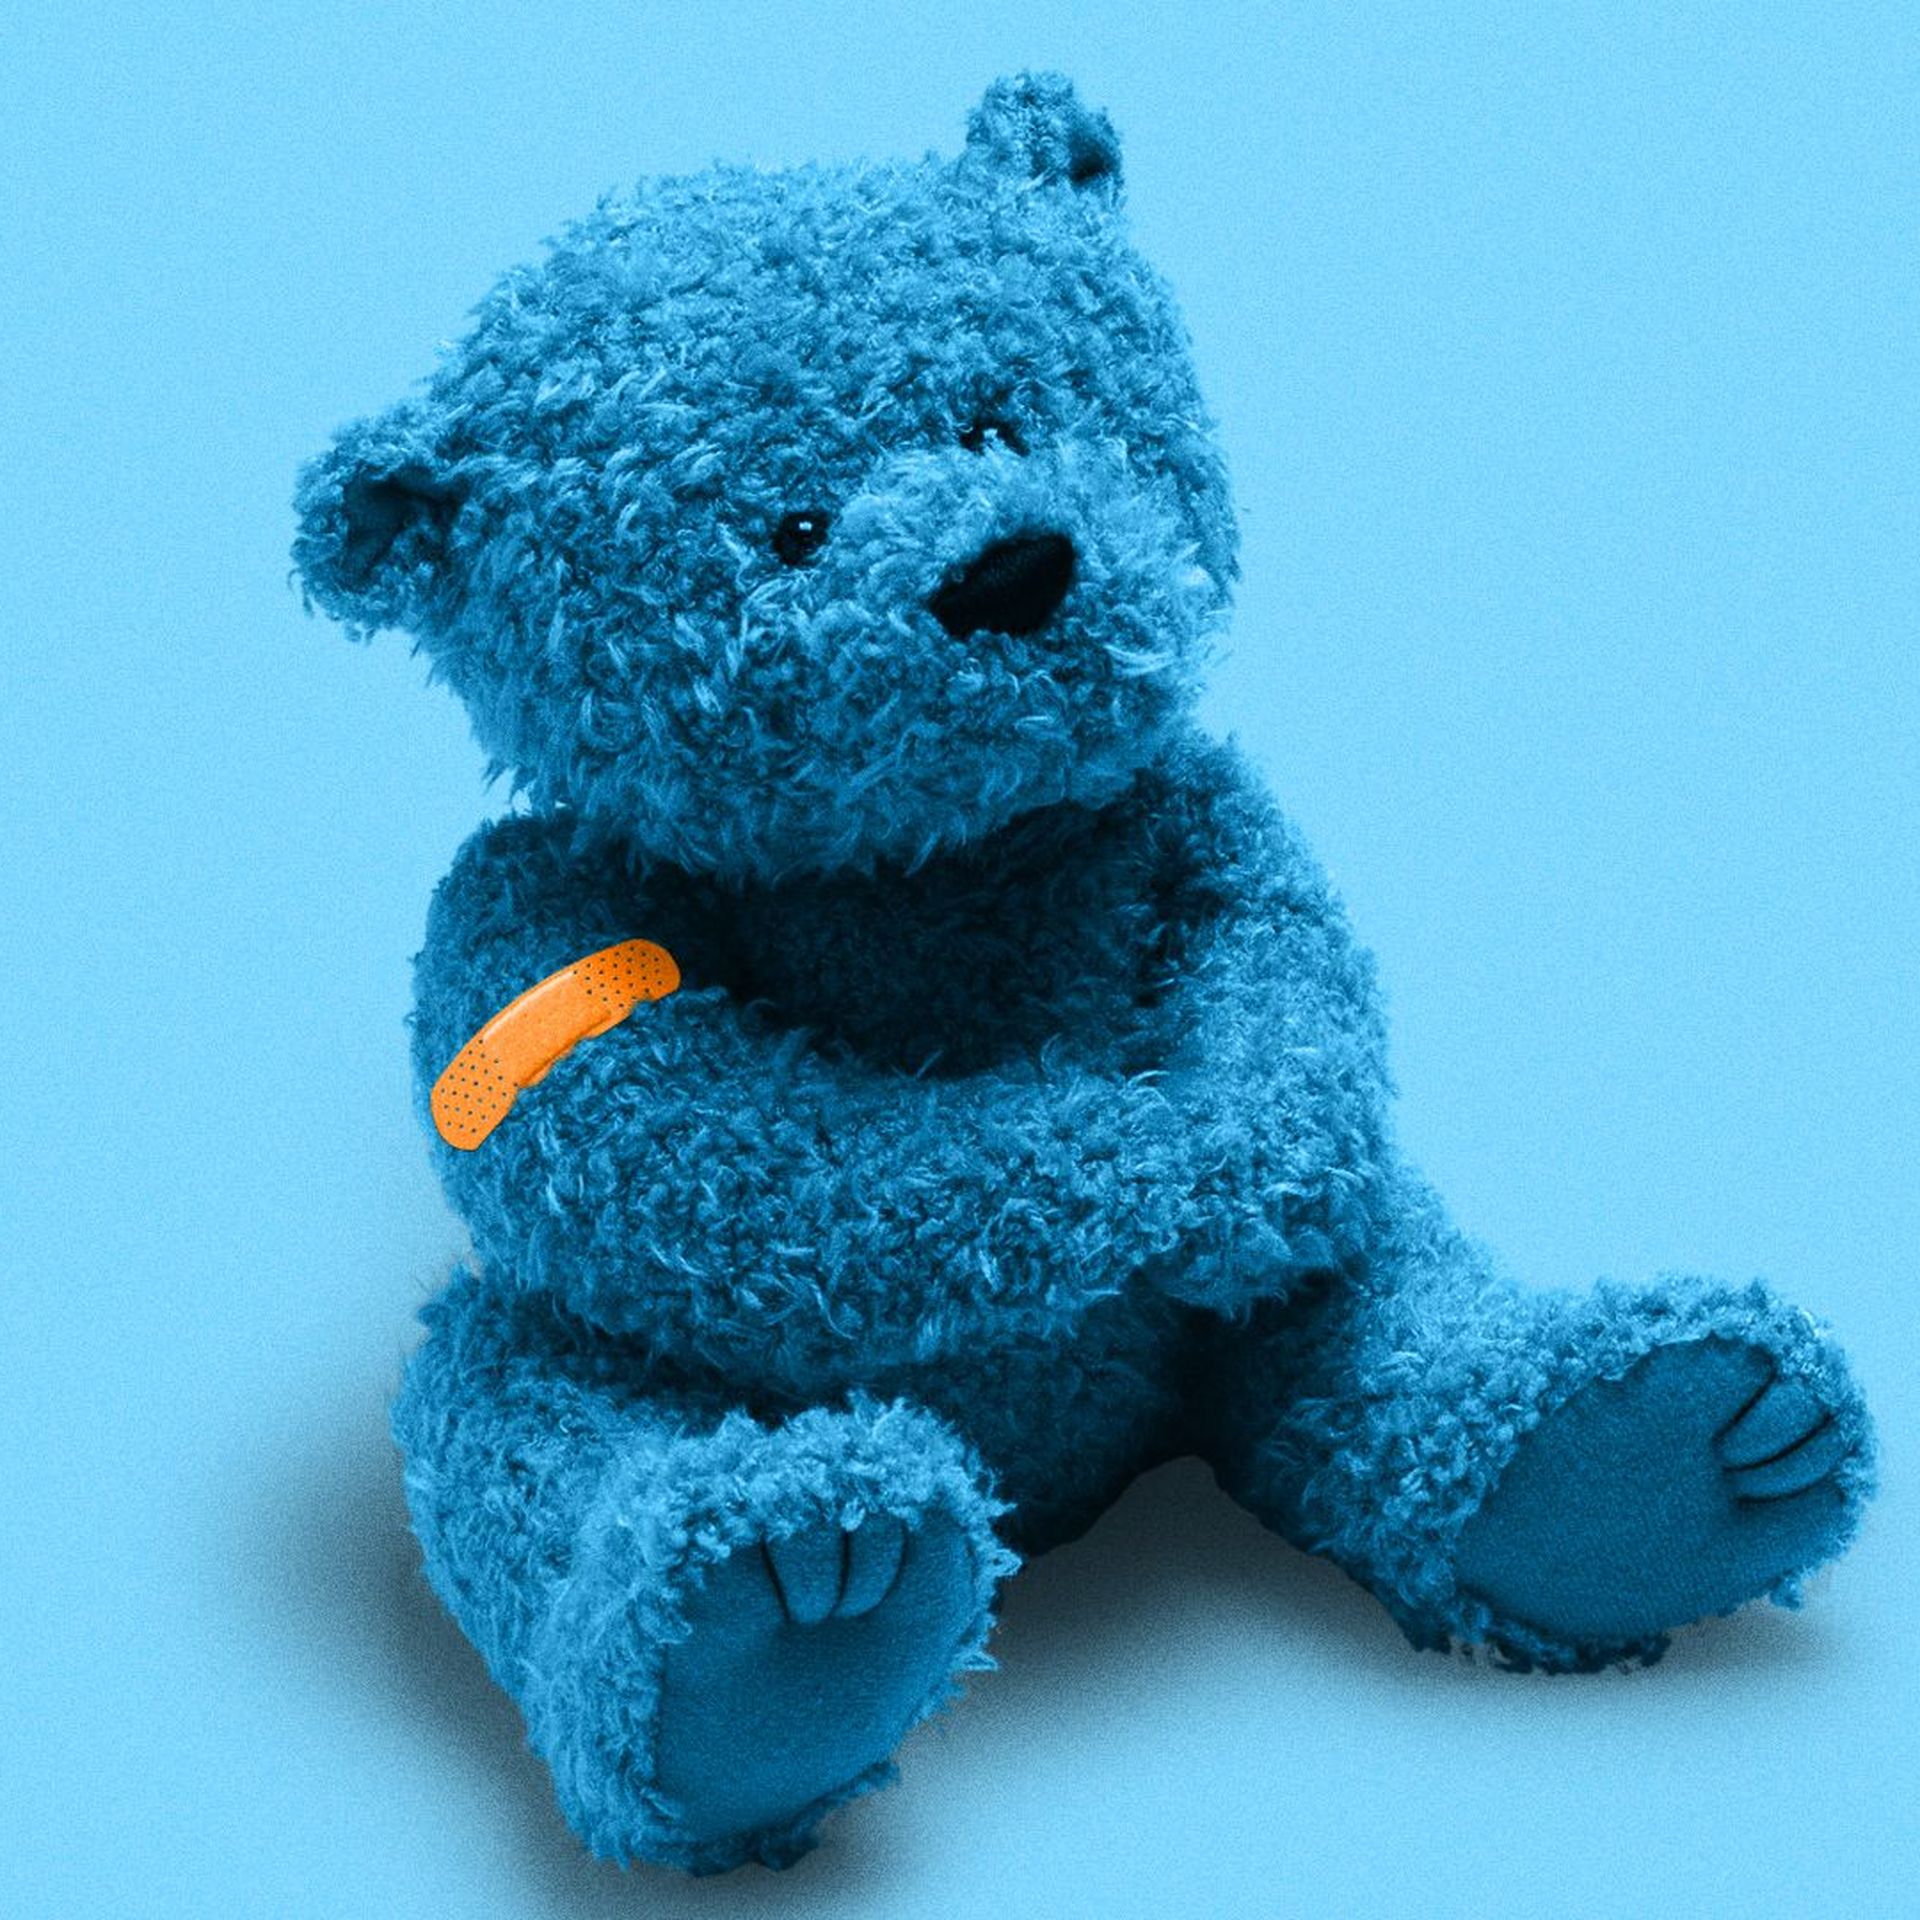 Illustration of a blue teddy bear with orange band-aid on its arm. 